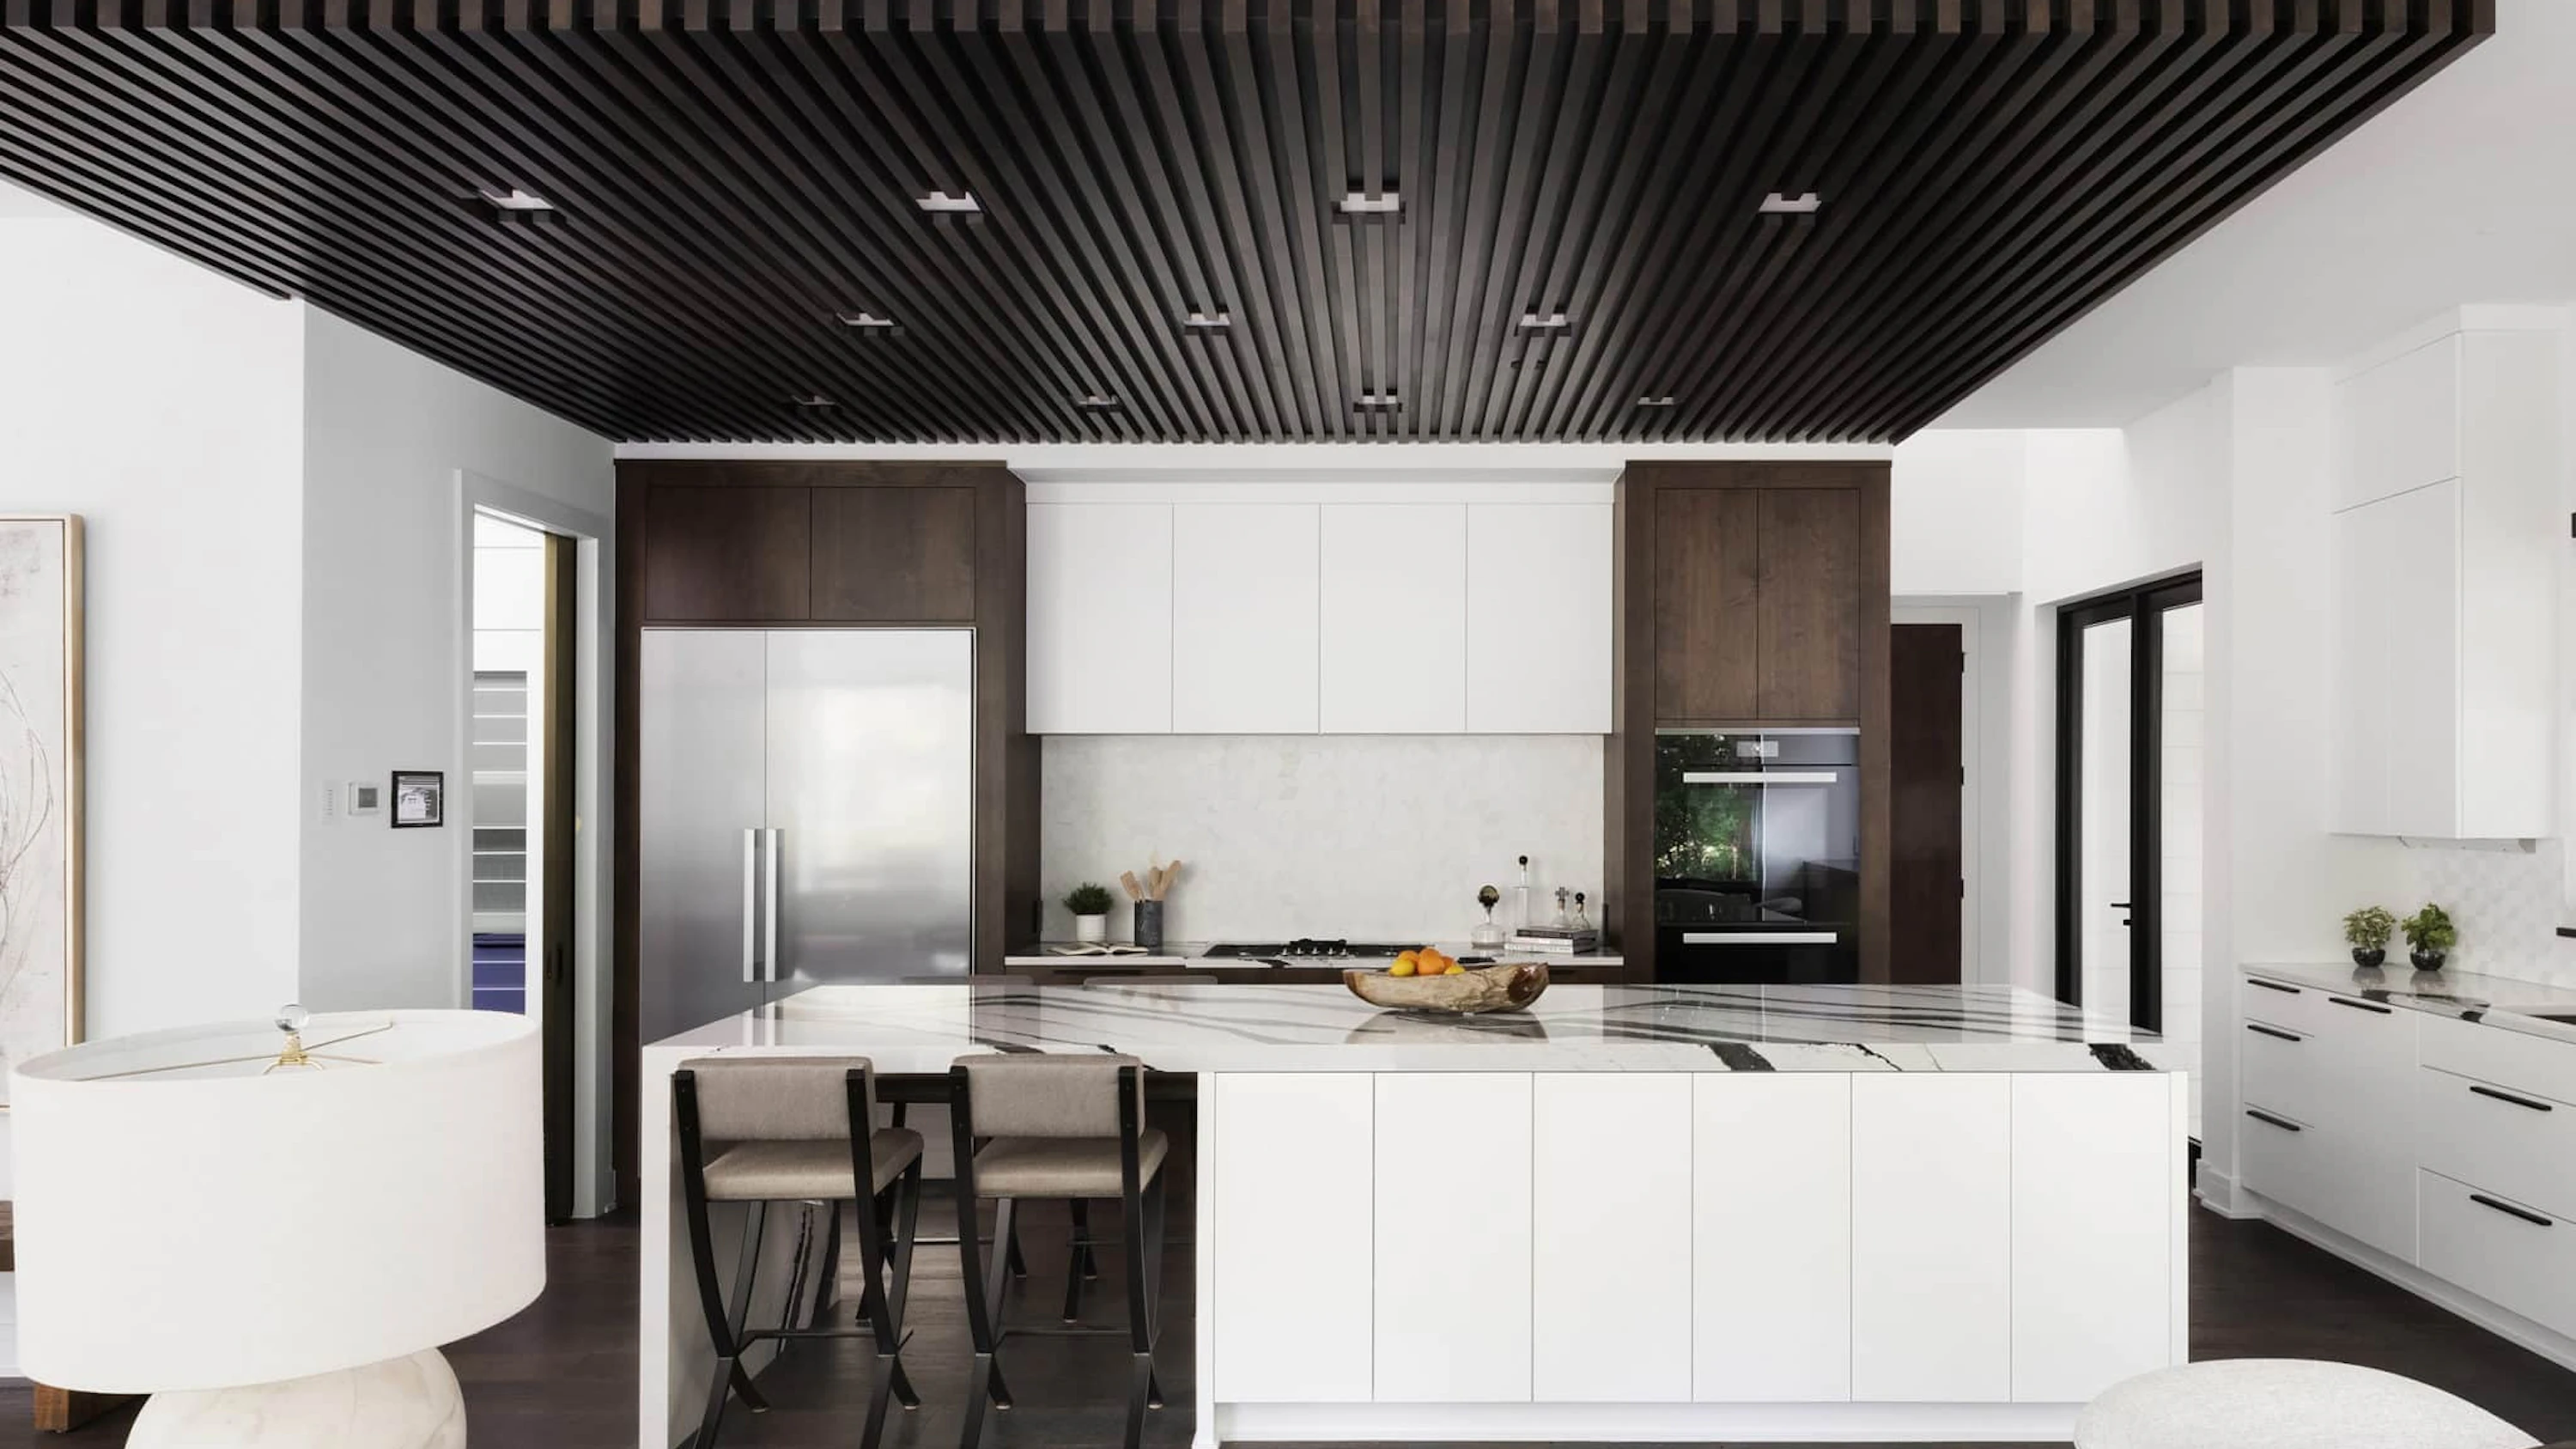 Modern kitchenwith  unique slatted wooden ceiling